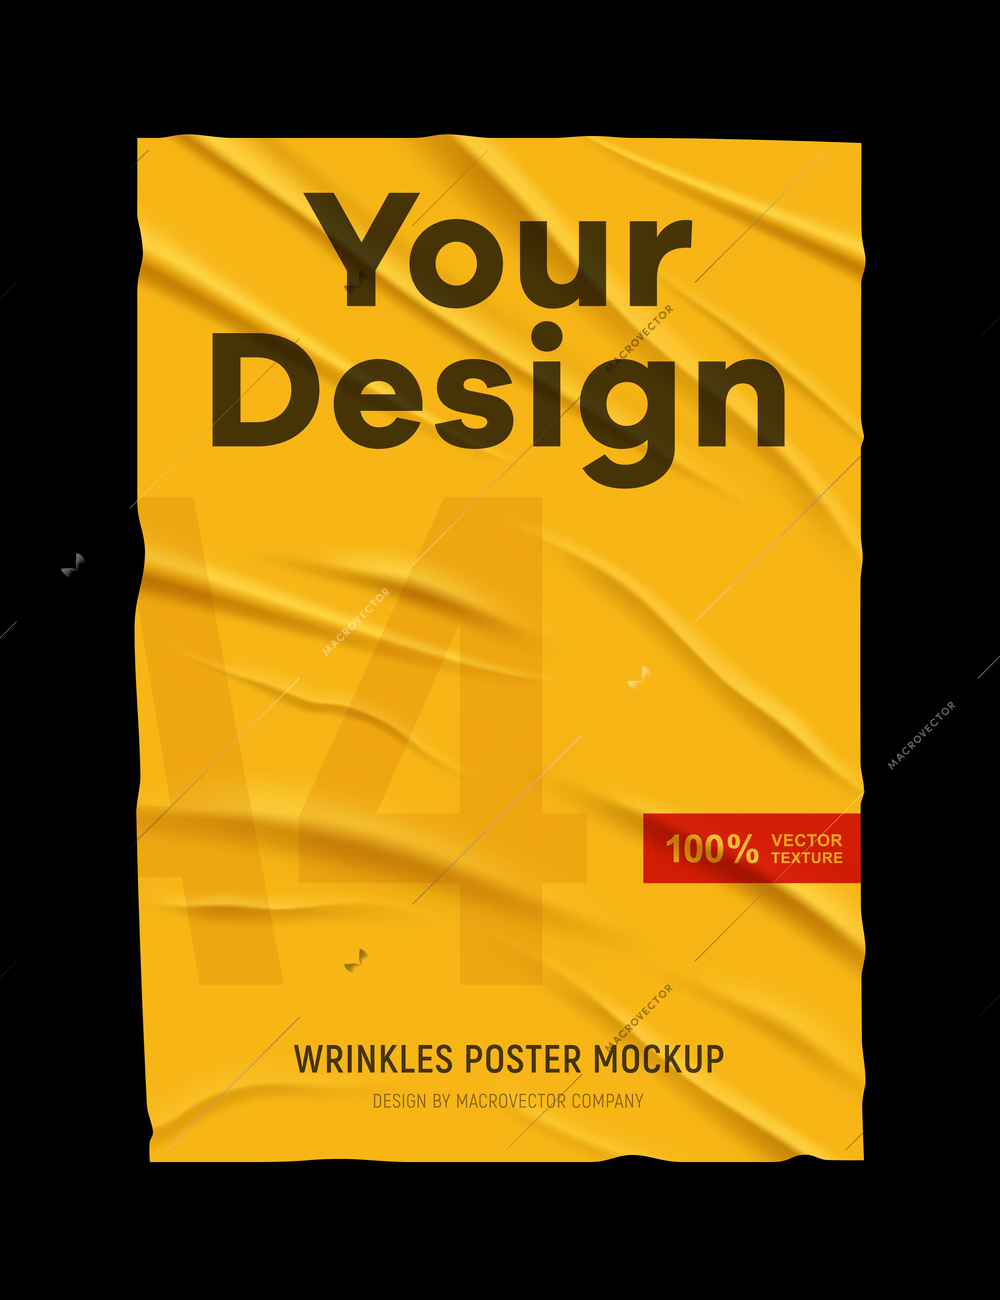 Wrinkled badly glued crumpled yellow paper poster mock up texture black background your design realistic vector illustration